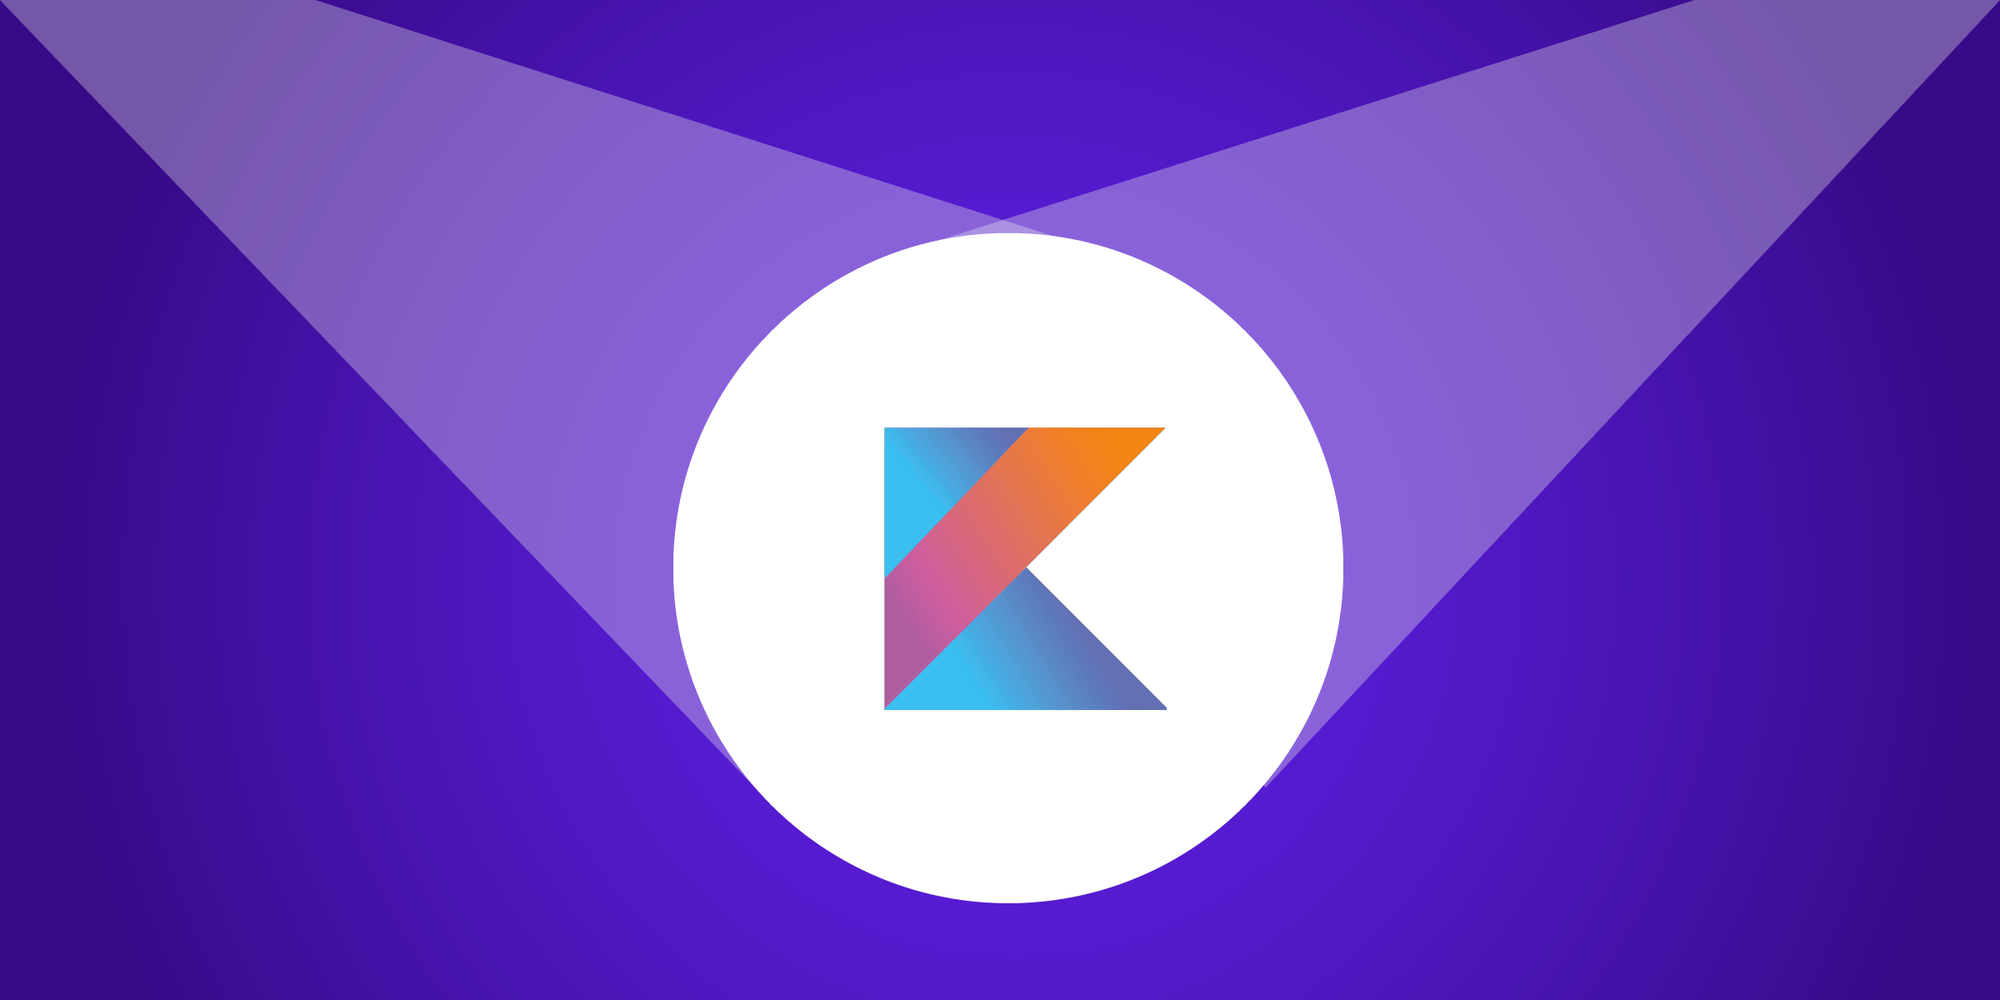 Top 5 things you need to know about Kotlin, Android's new programming language